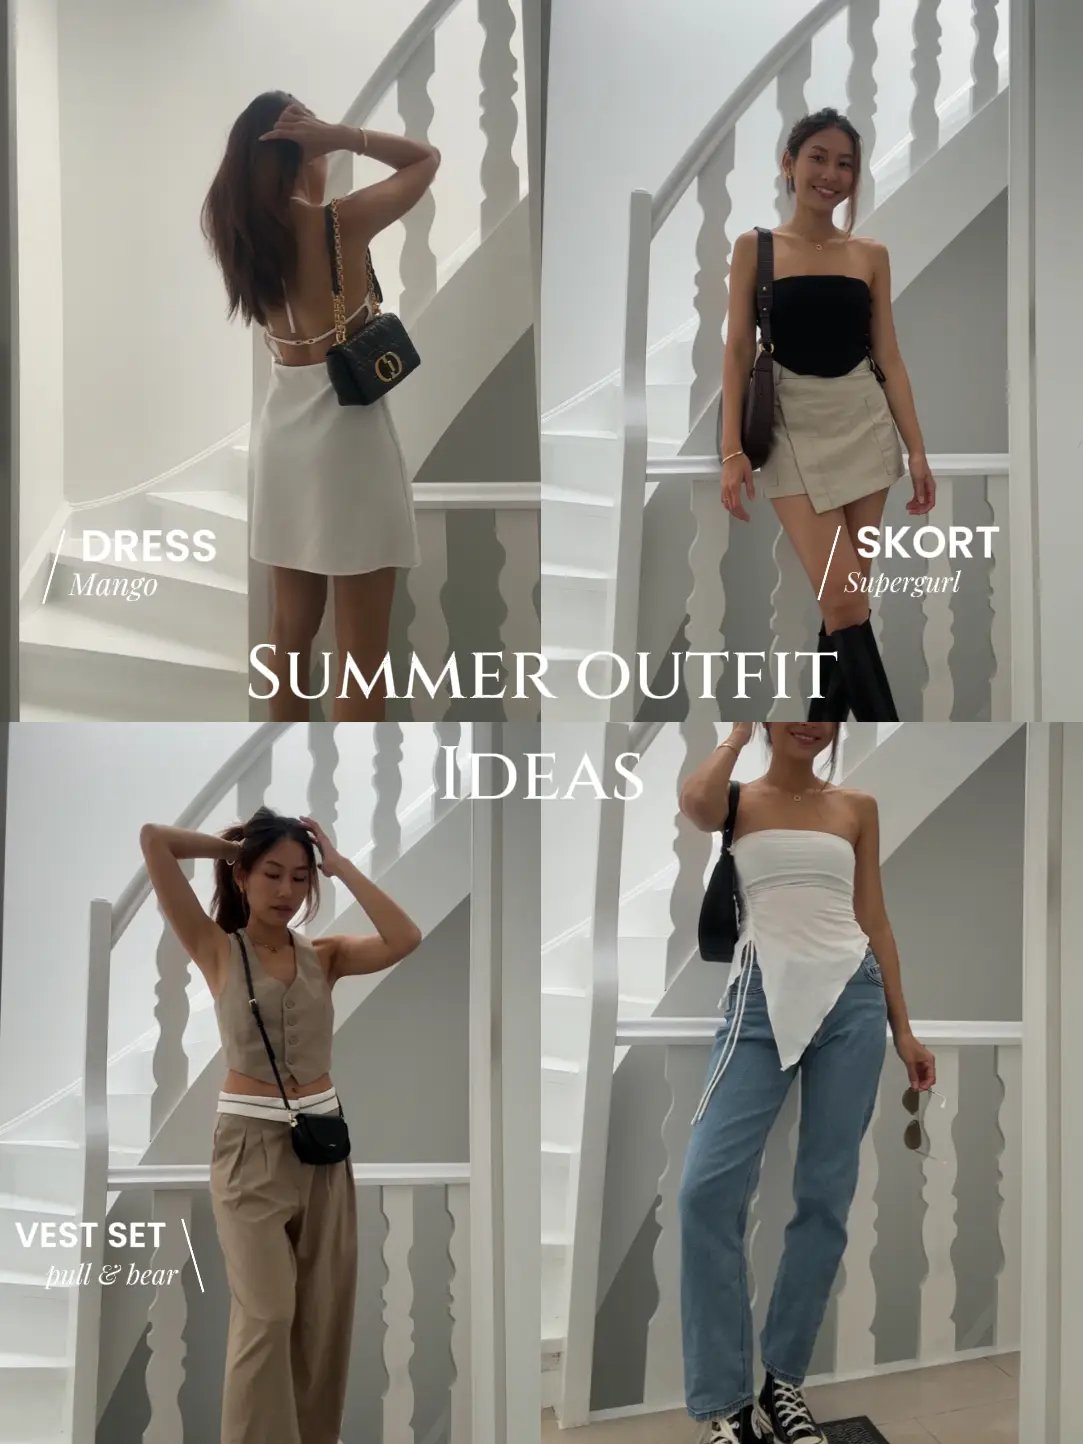 pinterest ; ⭒ 𝑒𝑠𝑡𝑟𝑒𝑙𝑙𝑎 ⭒  Corset top outfit, Cute casual outfits,  Corset fashion outfits